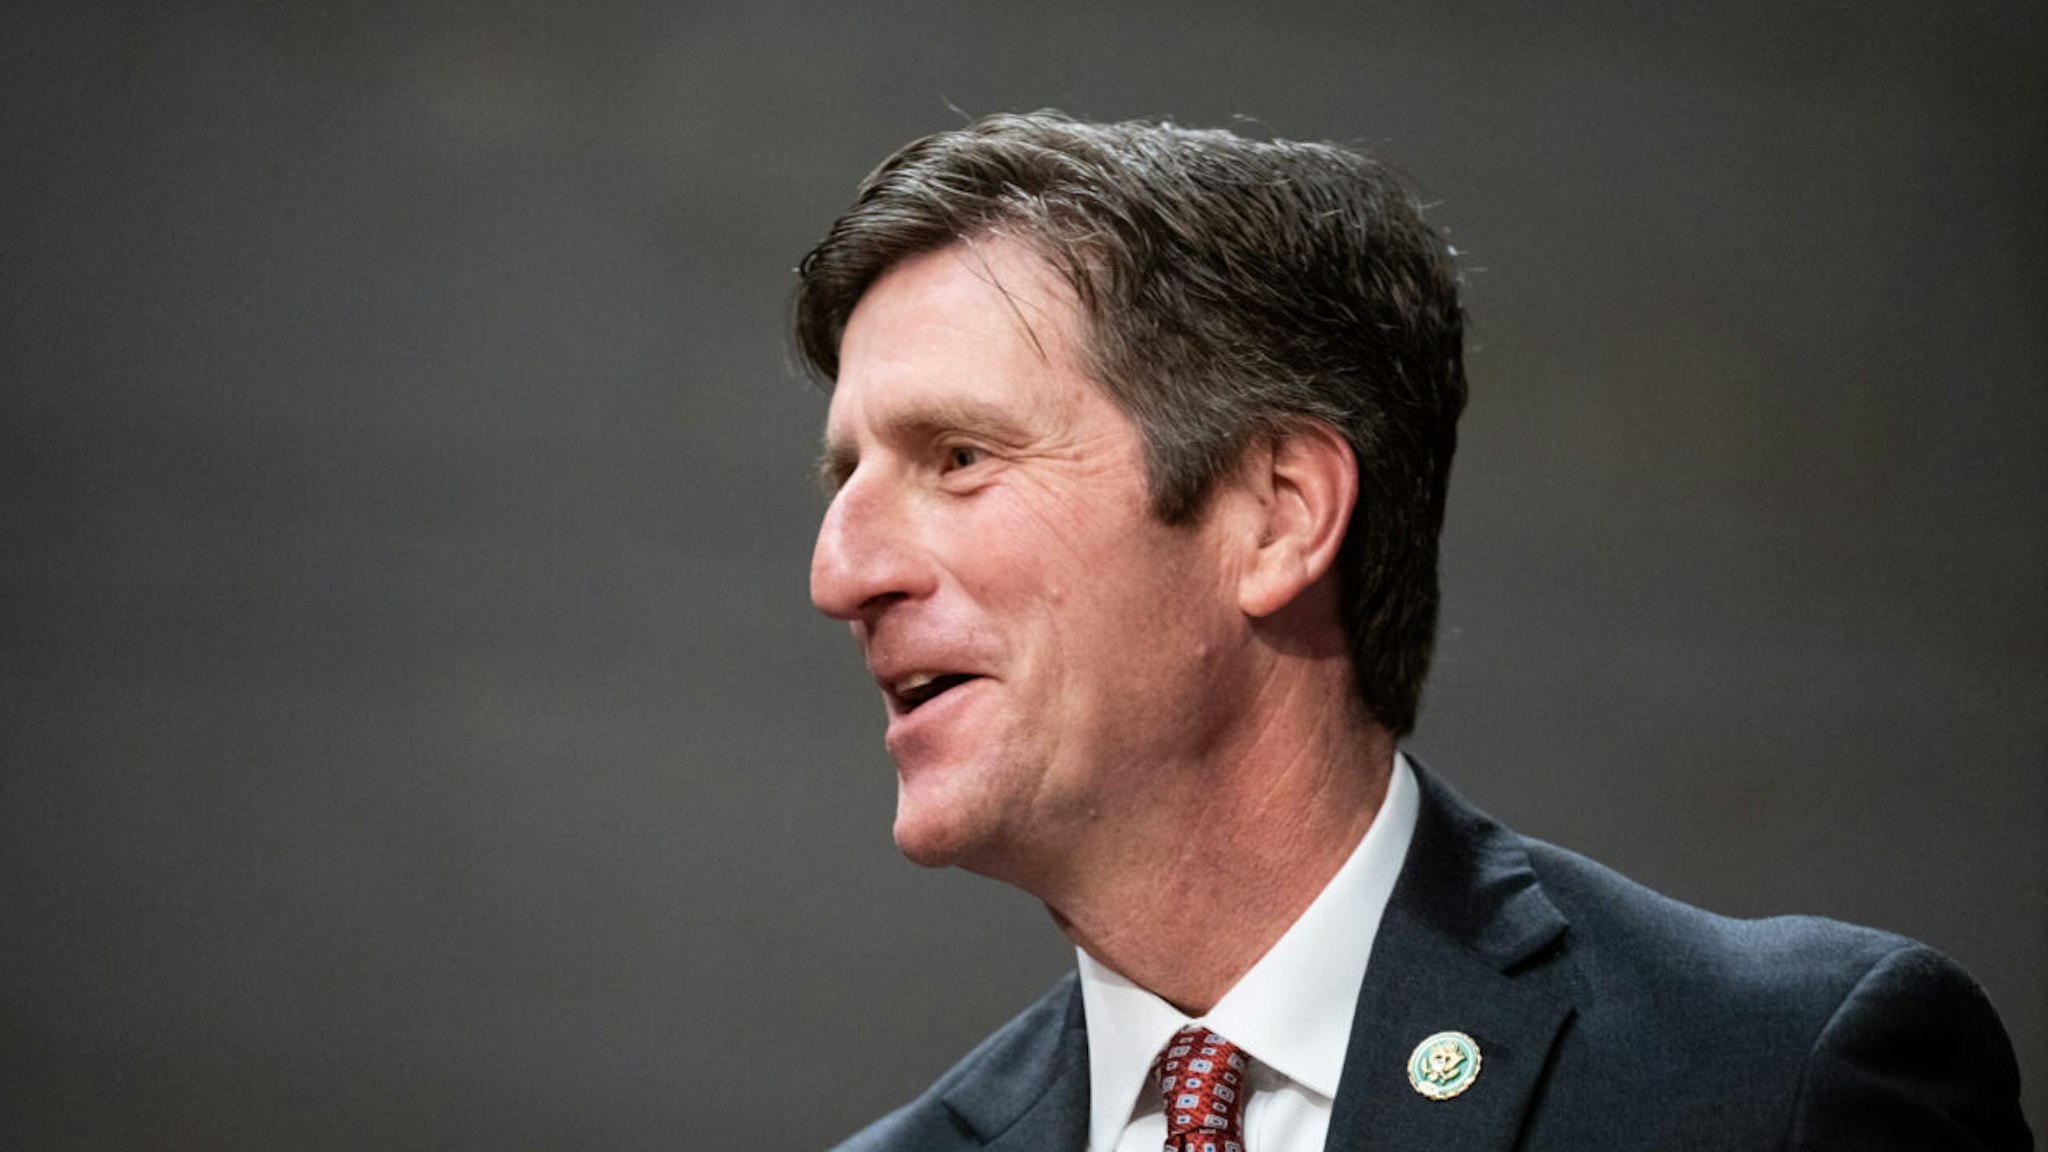 Rep. Greg Stanton, D-Ariz., arrives for the House Foreign Affairs Committee hearing on "The State of American Diplomacy in 2023: Growing Conflicts, Budget Challenges, and Great Power Competition" in the Capitol Visitor Center on Thursday, March 23, 2023.